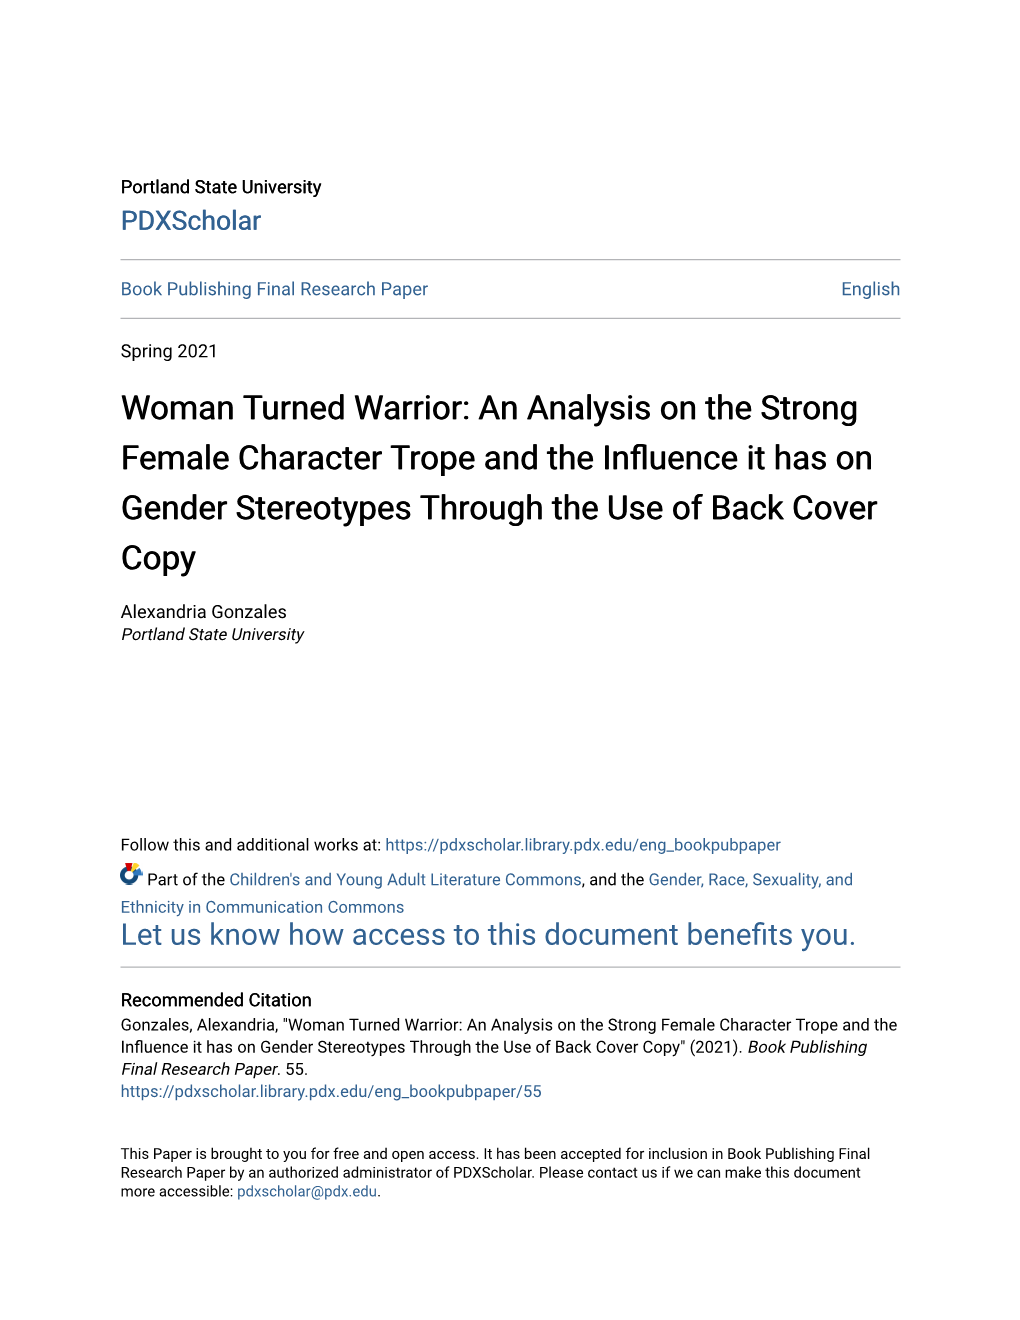 An Analysis on the Strong Female Character Trope and the Influence It Has on Gender Stereotypes Through the Use of Back Cover Copy